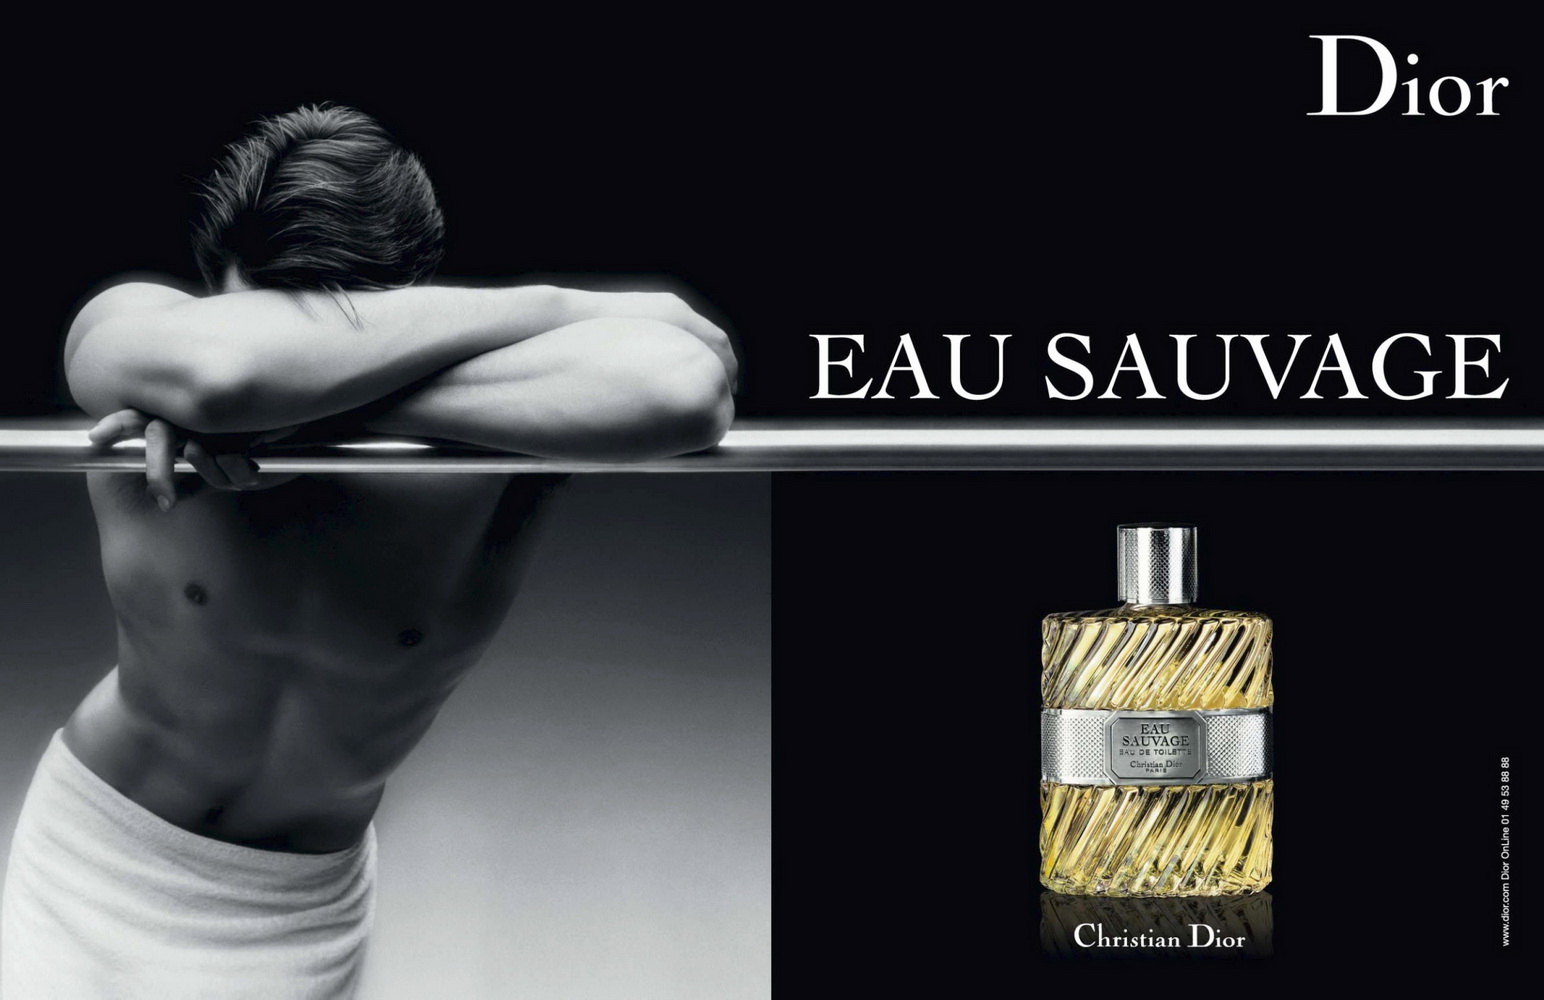 eau sauvage meaning